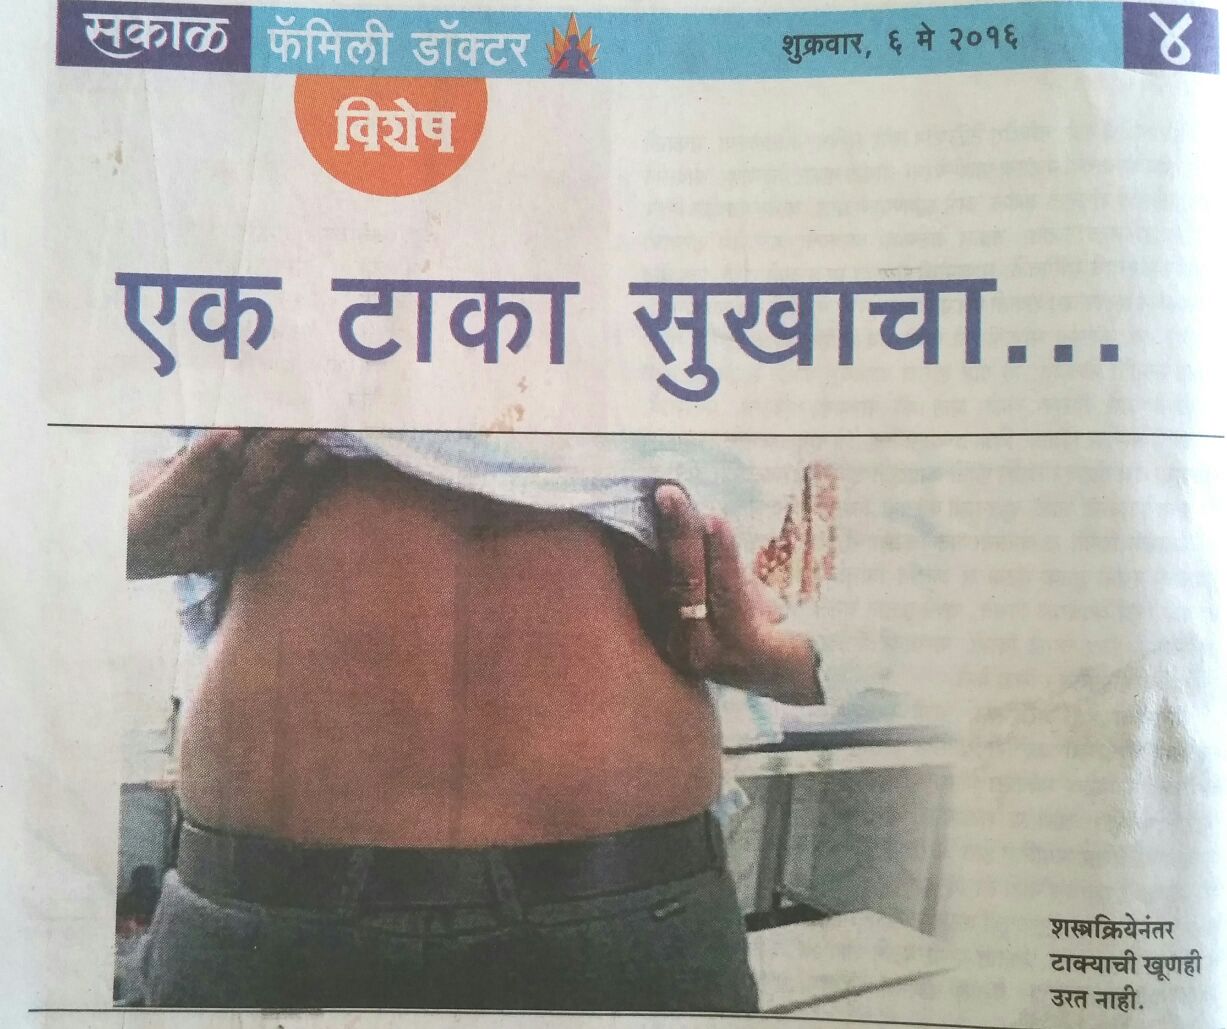 An article in Family doctor supplement in sakal newspaper